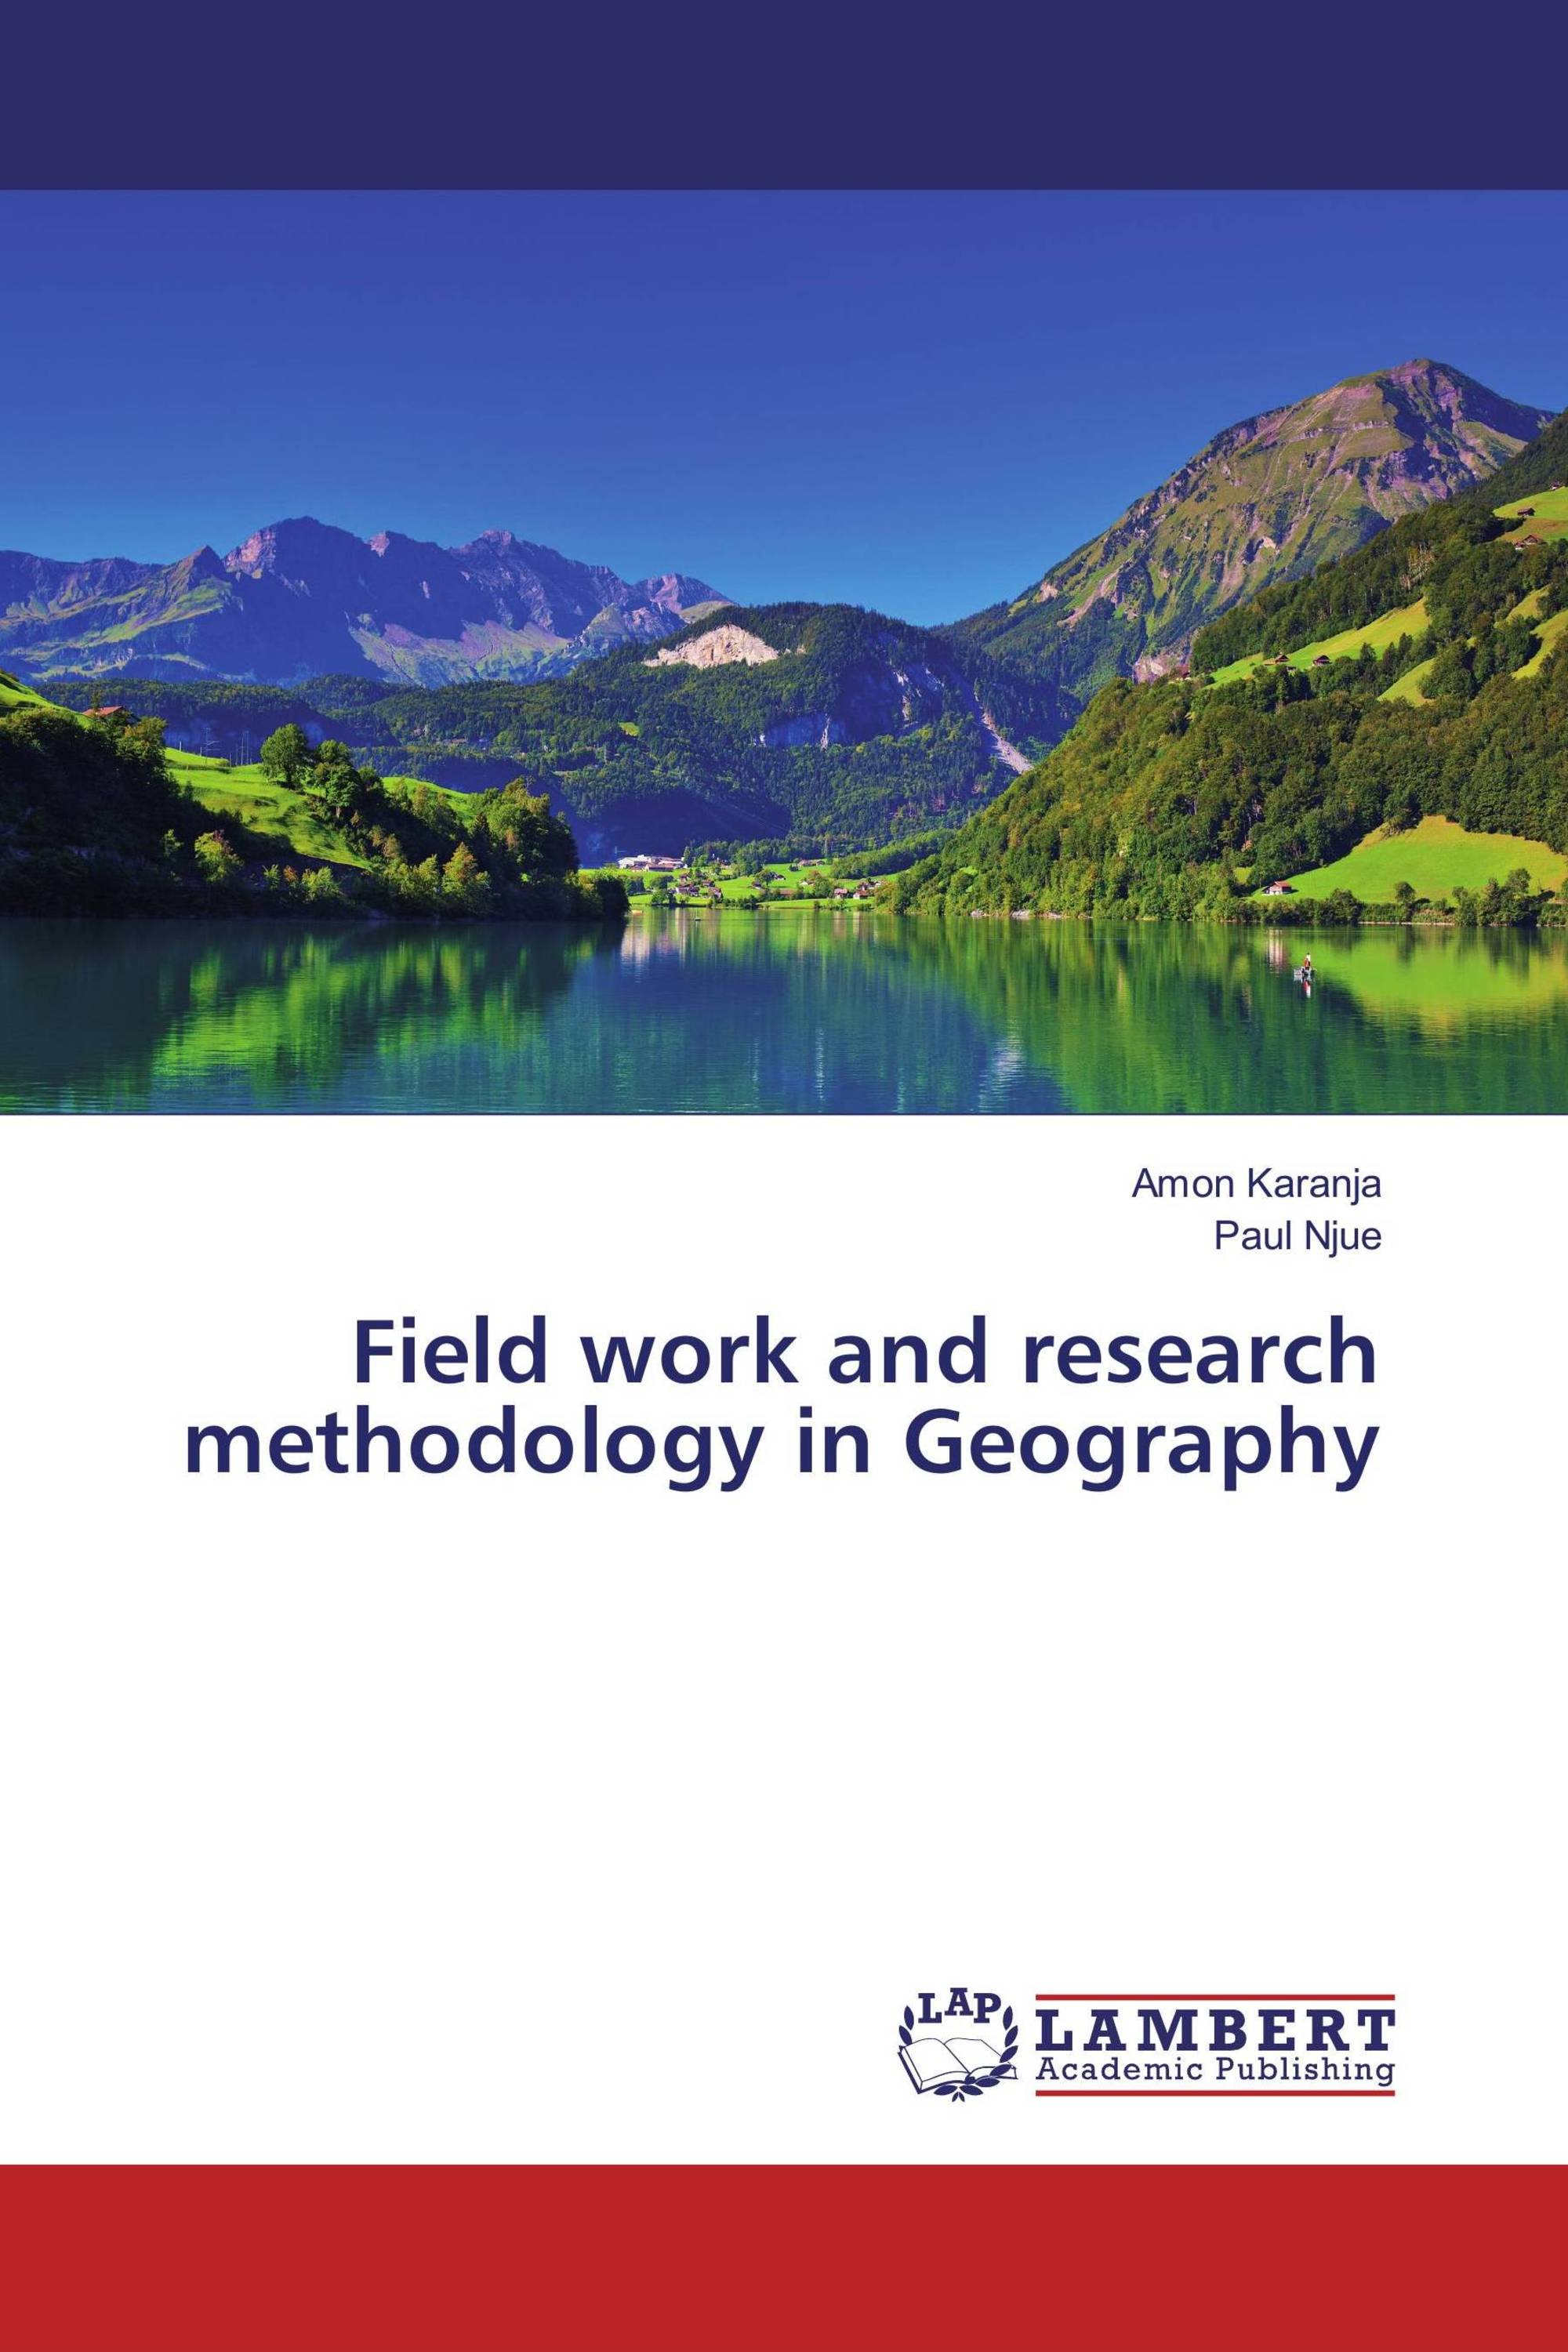 how to write a methodology in geography